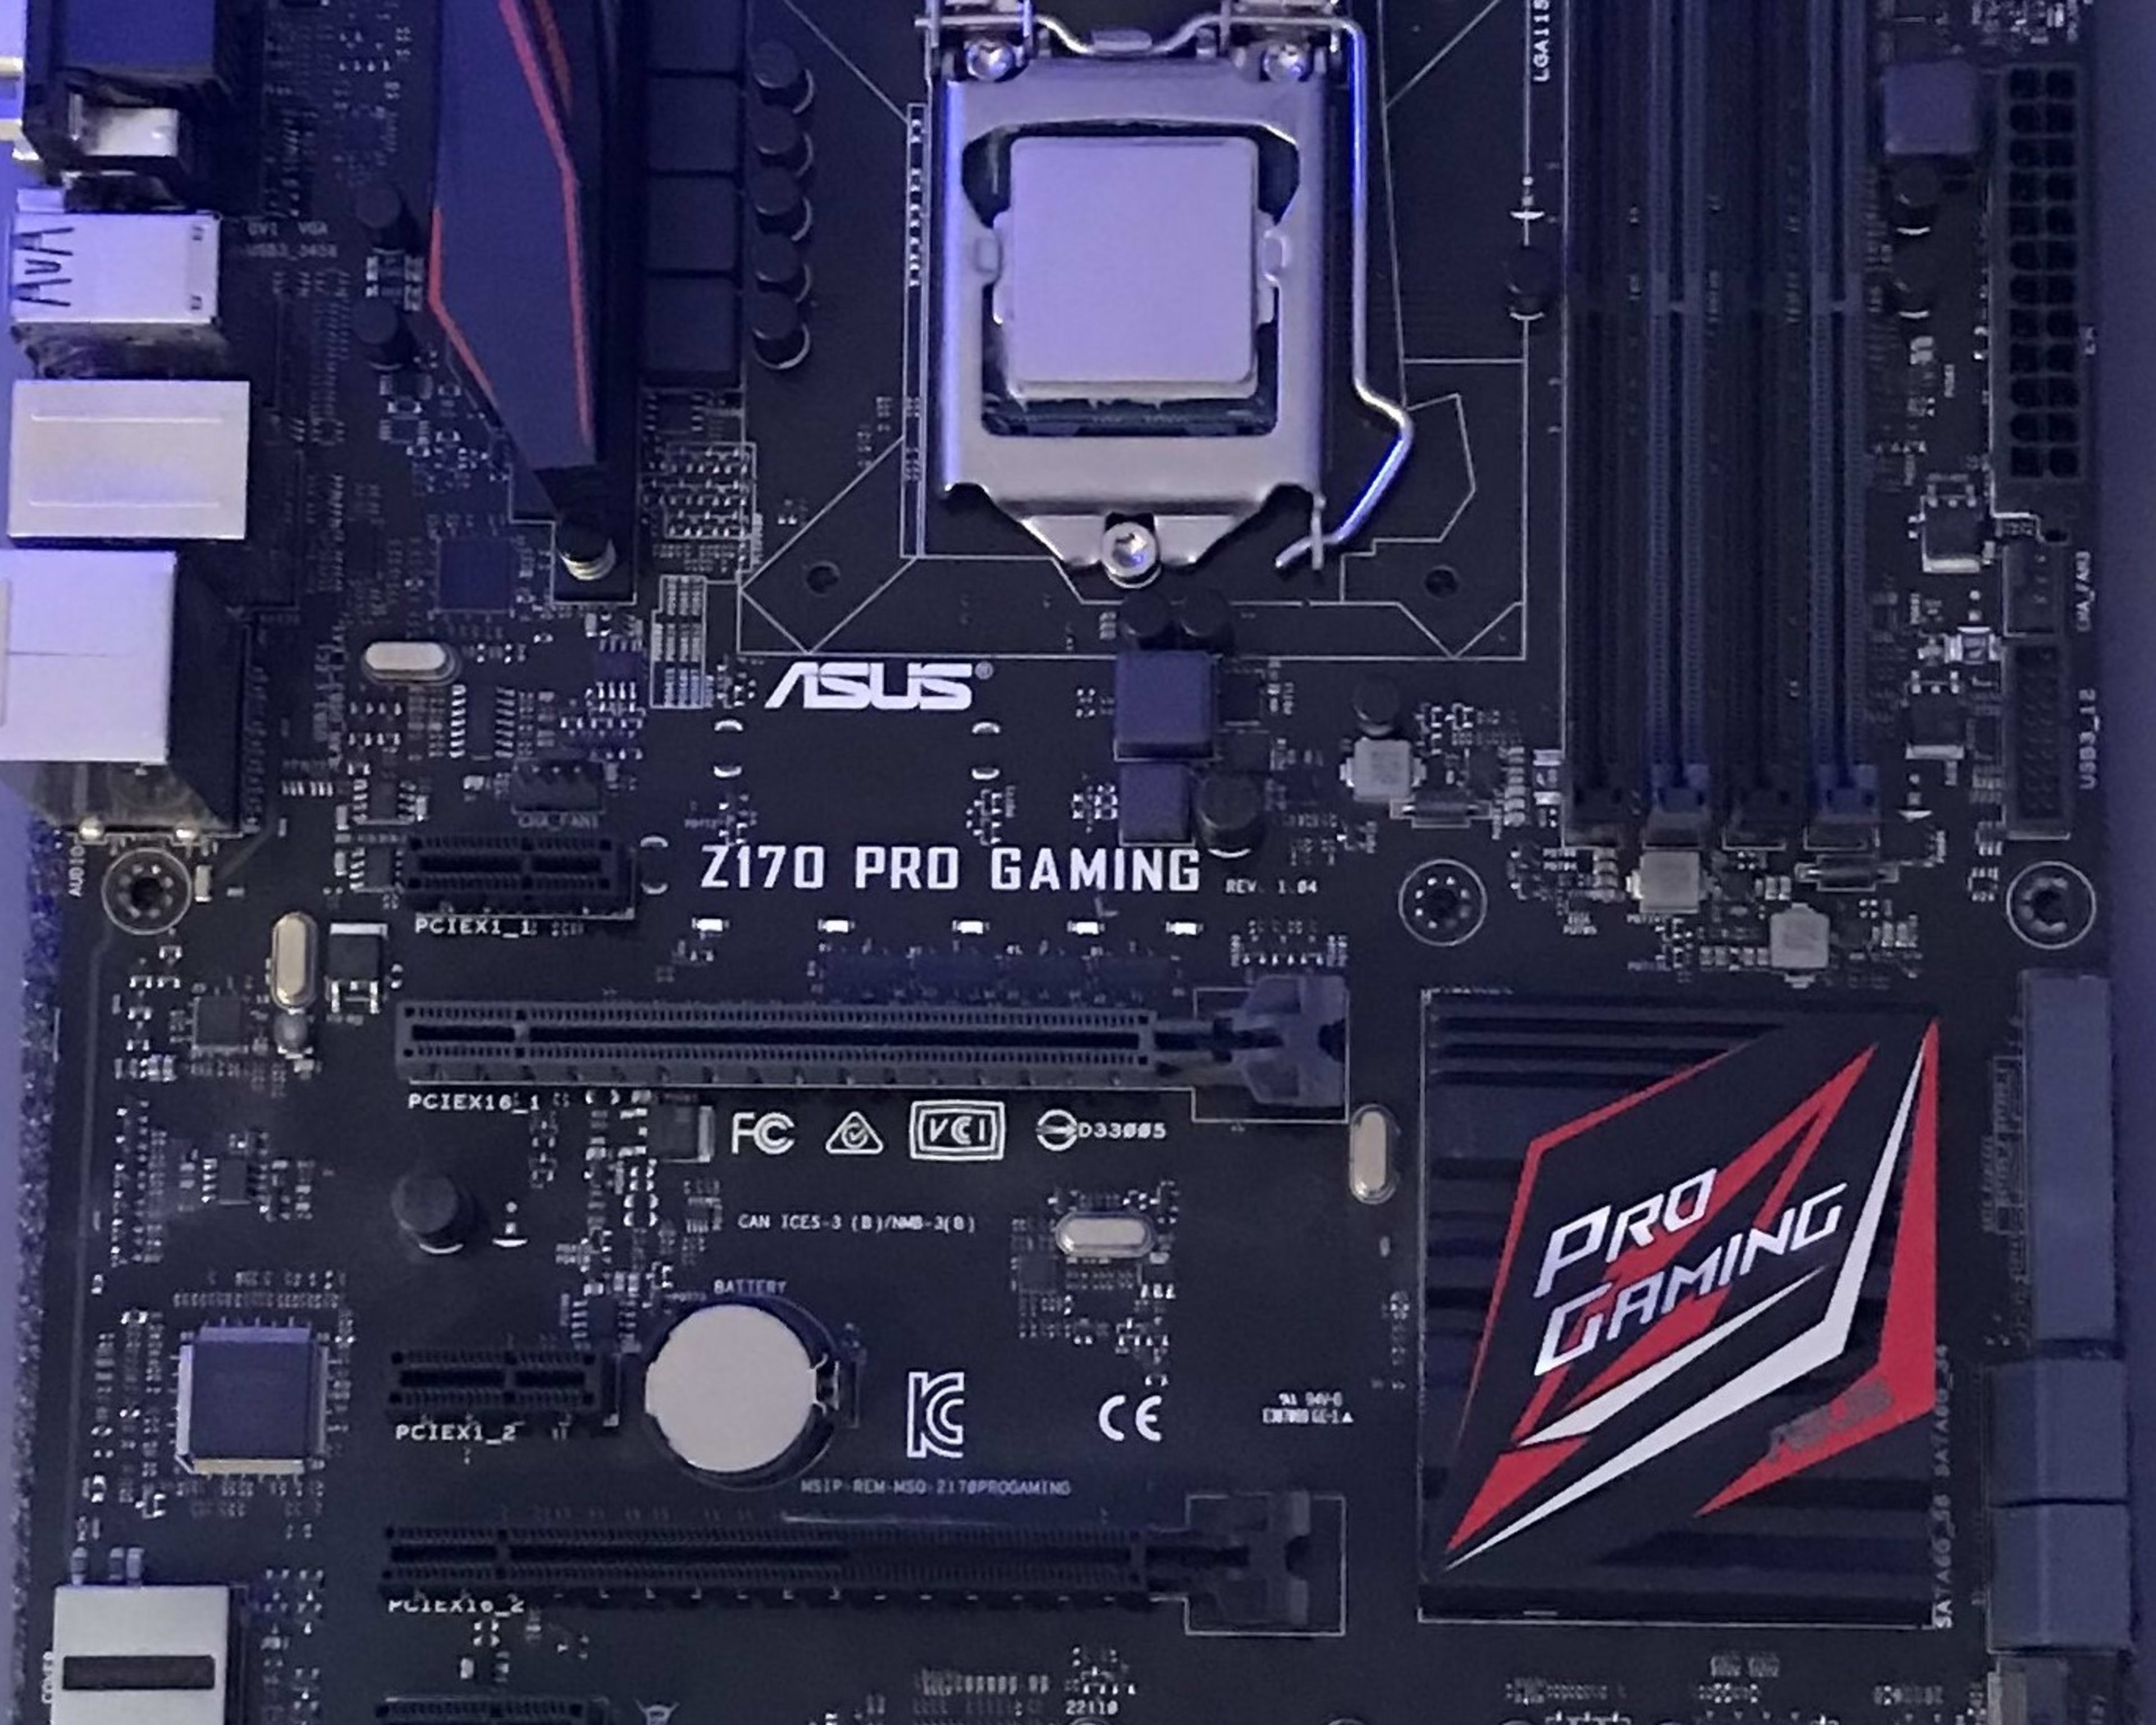 CPU,Mobo and Ram combo Intel i76700k ASUS z170pro gaming & 16gb Trident Z ddr4 3400